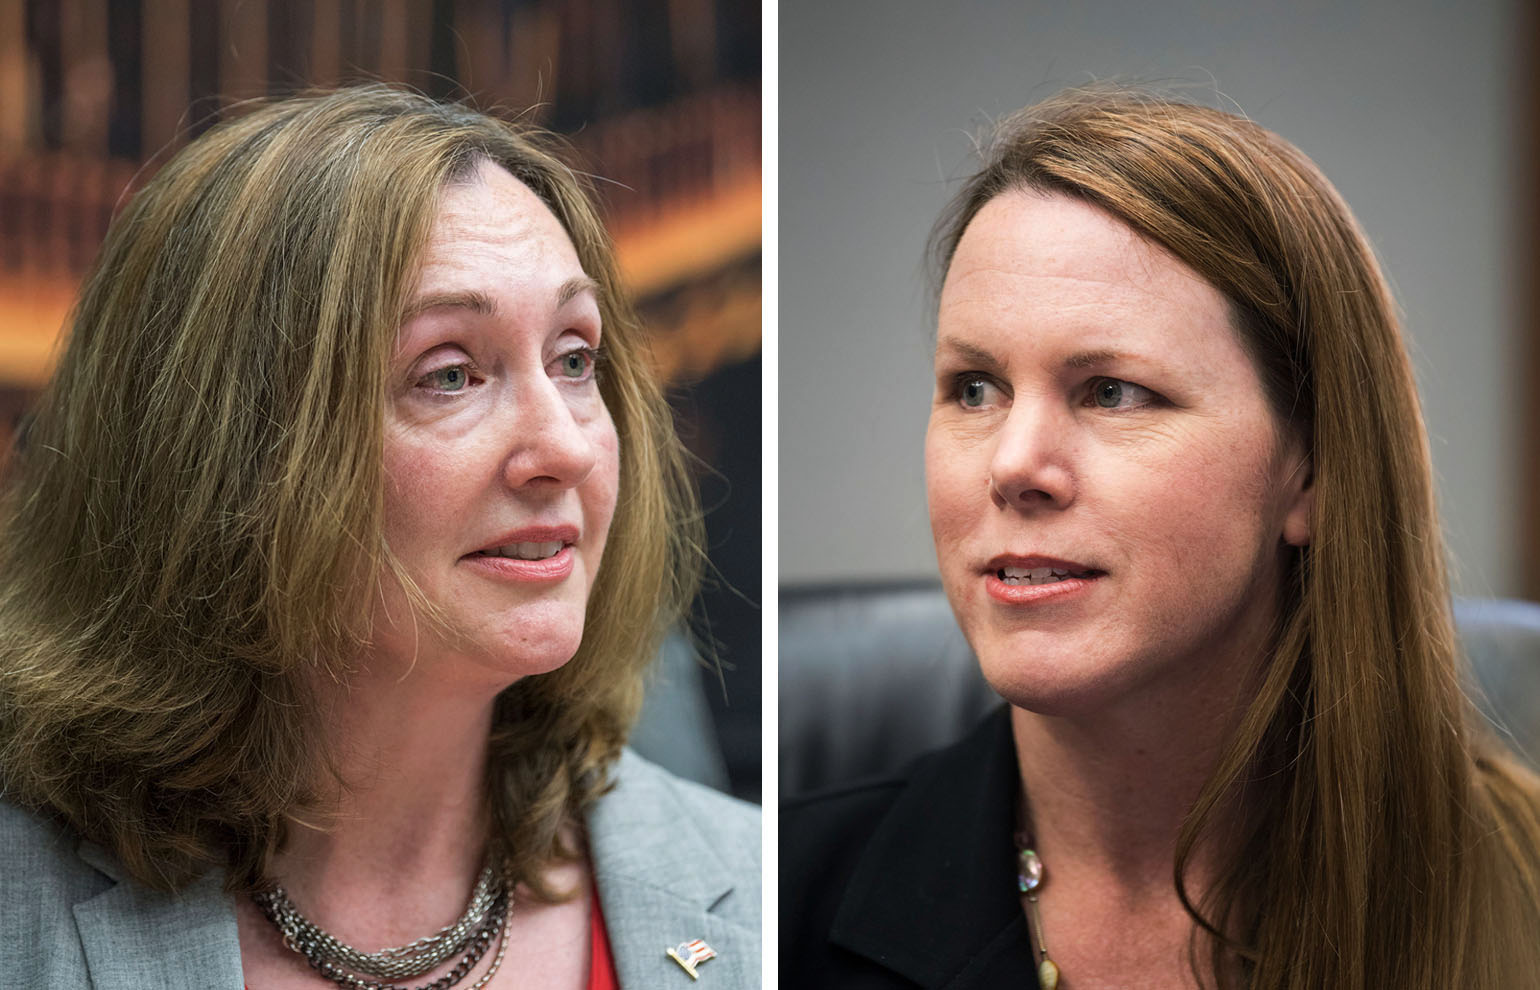 Vancouver City Council, position 1 candidates are incumbent Laurie Lebowsky, left, and Sarah Fox.